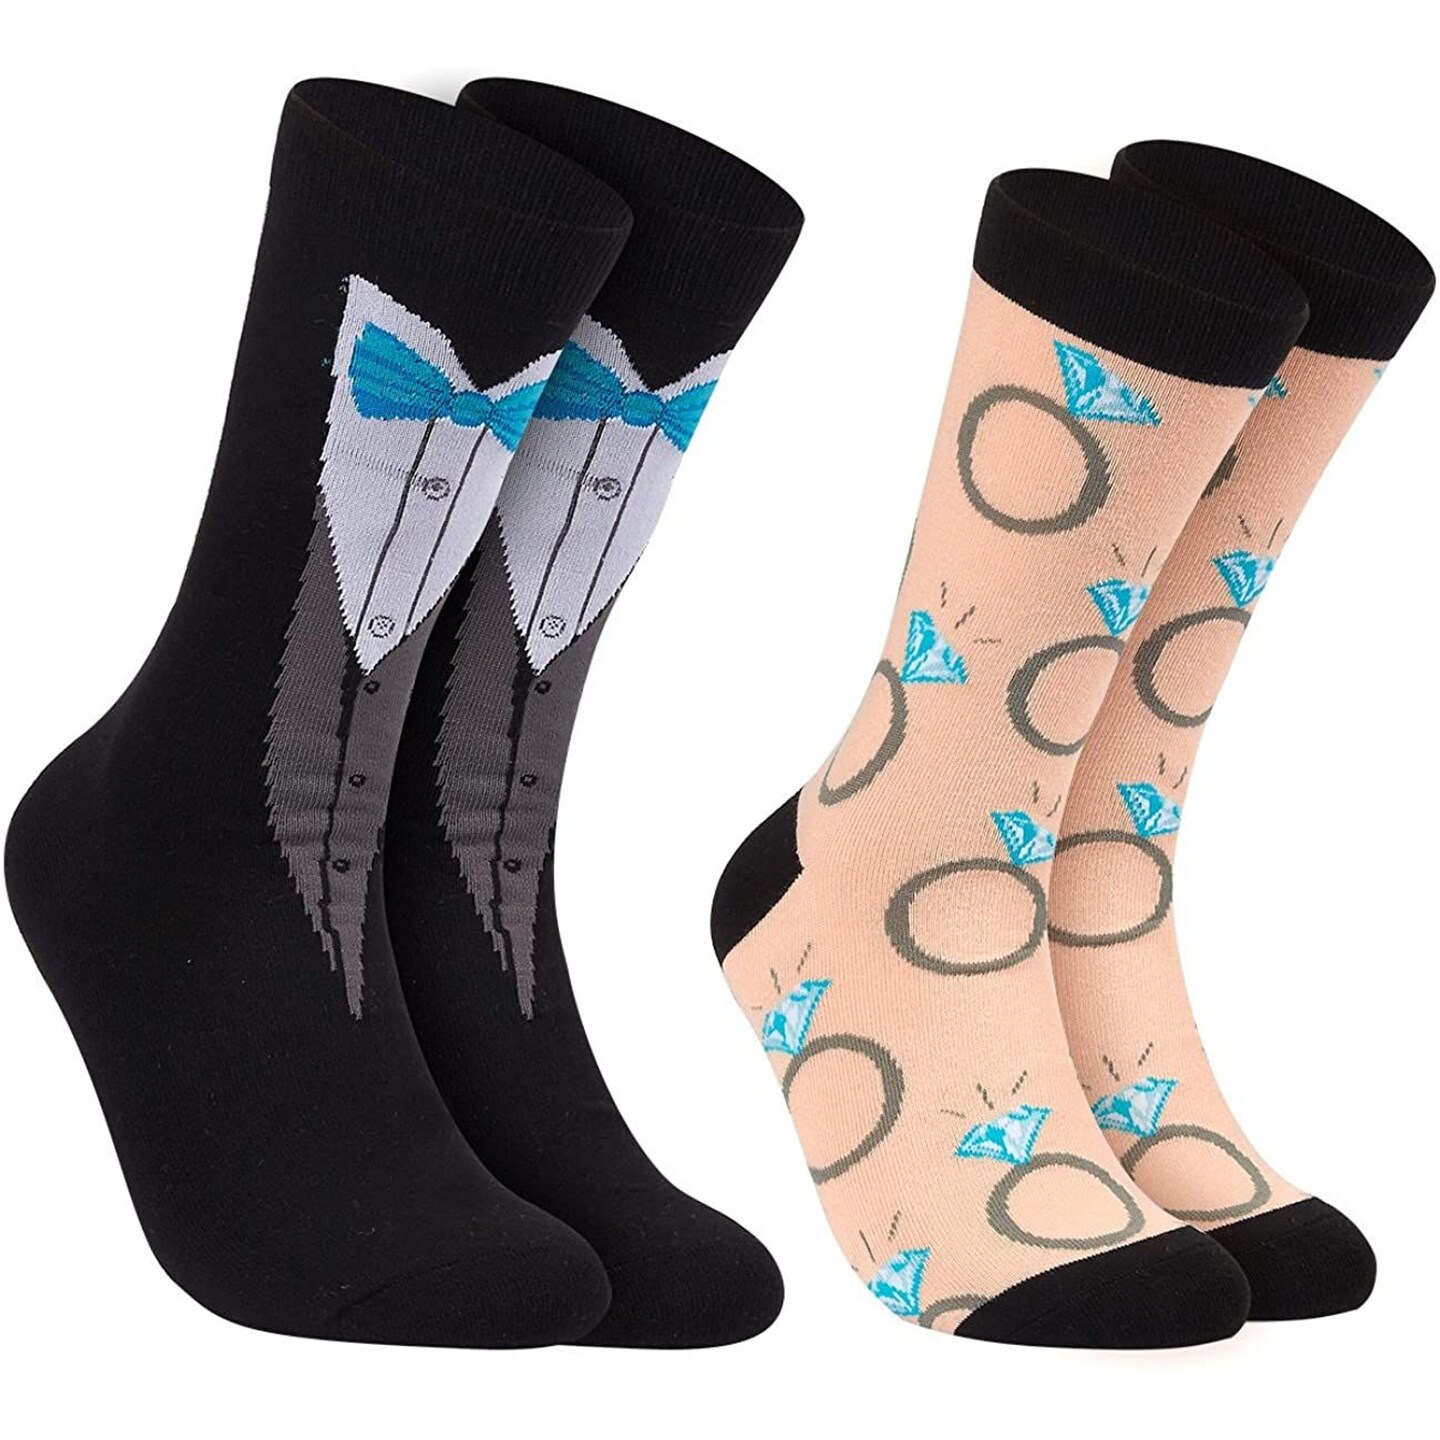 2 Pairs Bride and Groom Wedding Socks - Novelty Tuxedo and Diamond Ring Designs, One Size